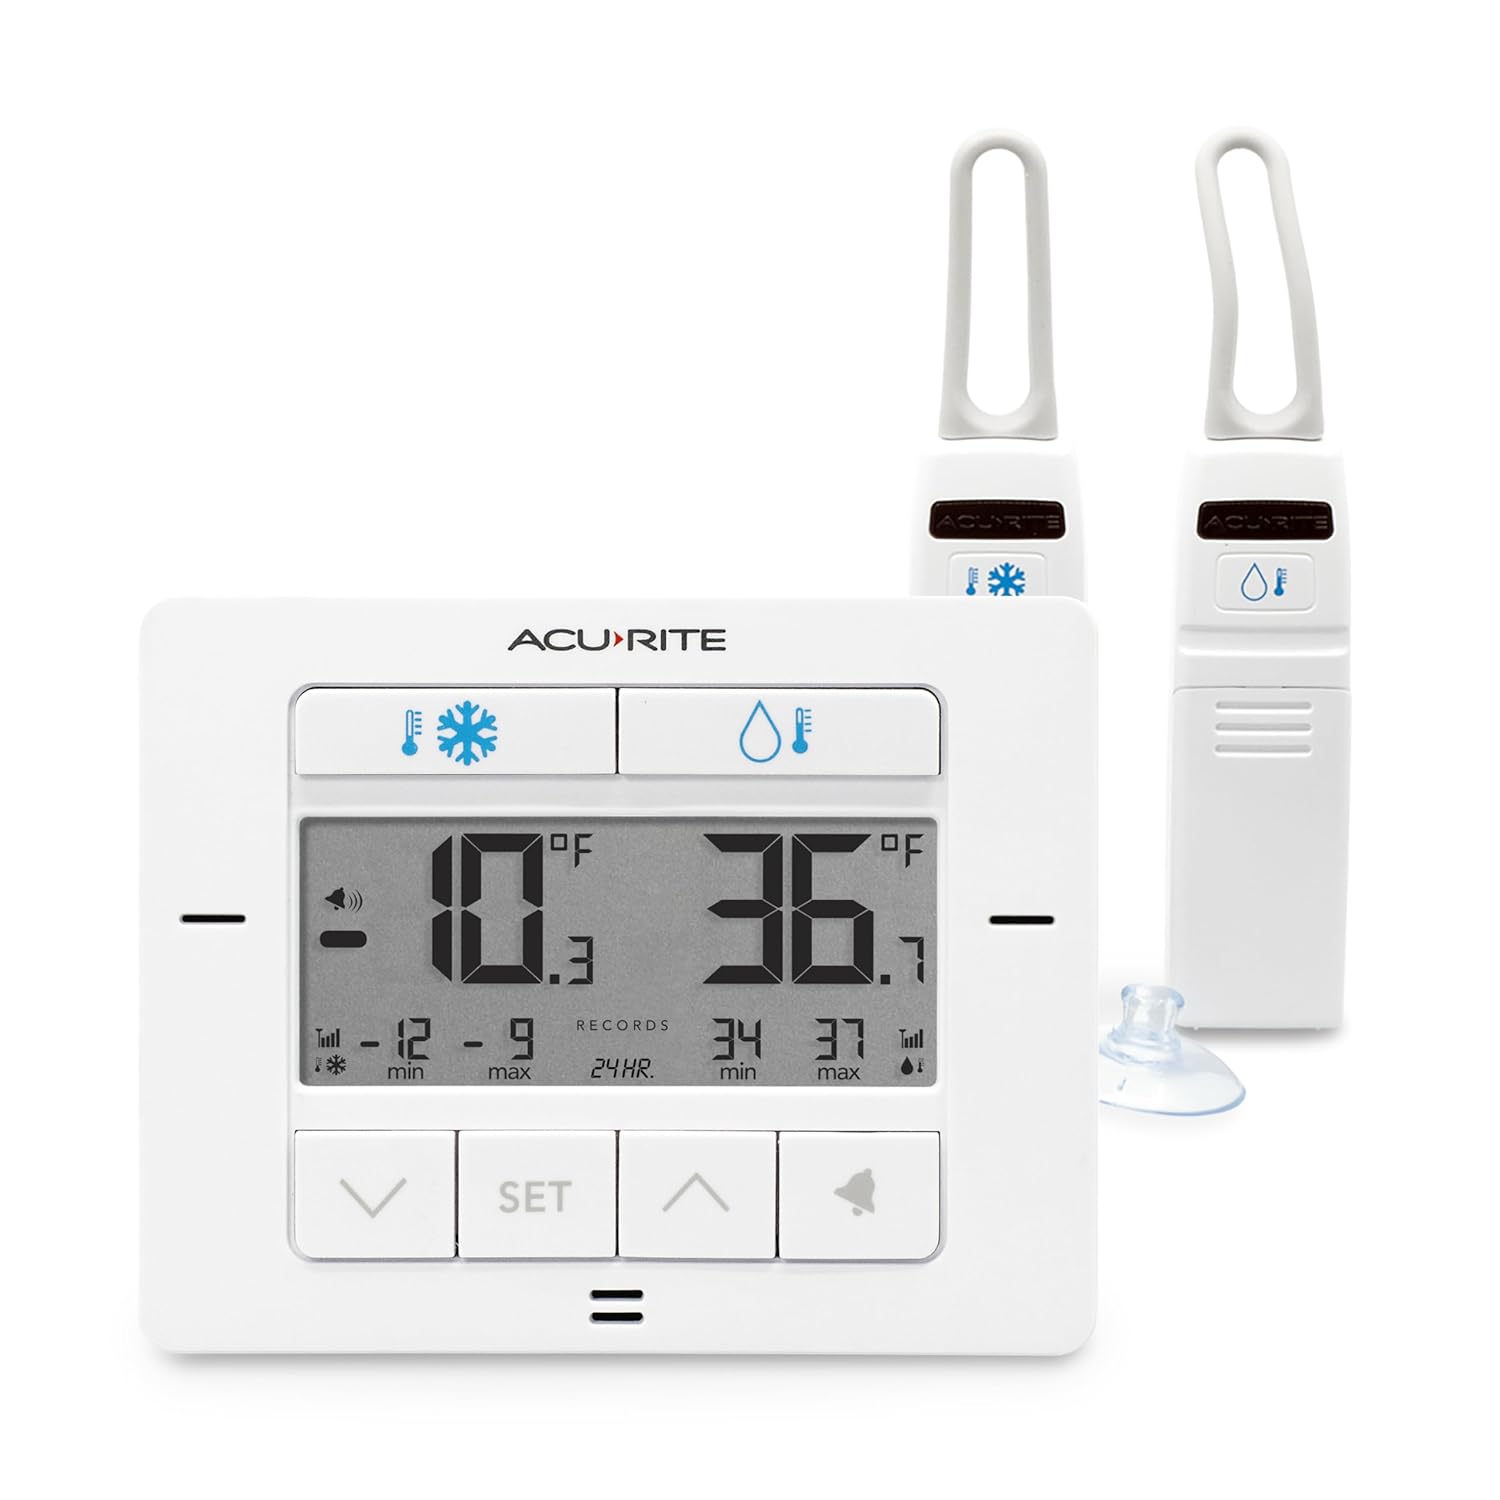 AcuRite Matte White Digital Wireless Fridge and Freezer Thermometer for Home and Restaurants with Alarm and High/Low Temperature Records (00523M)